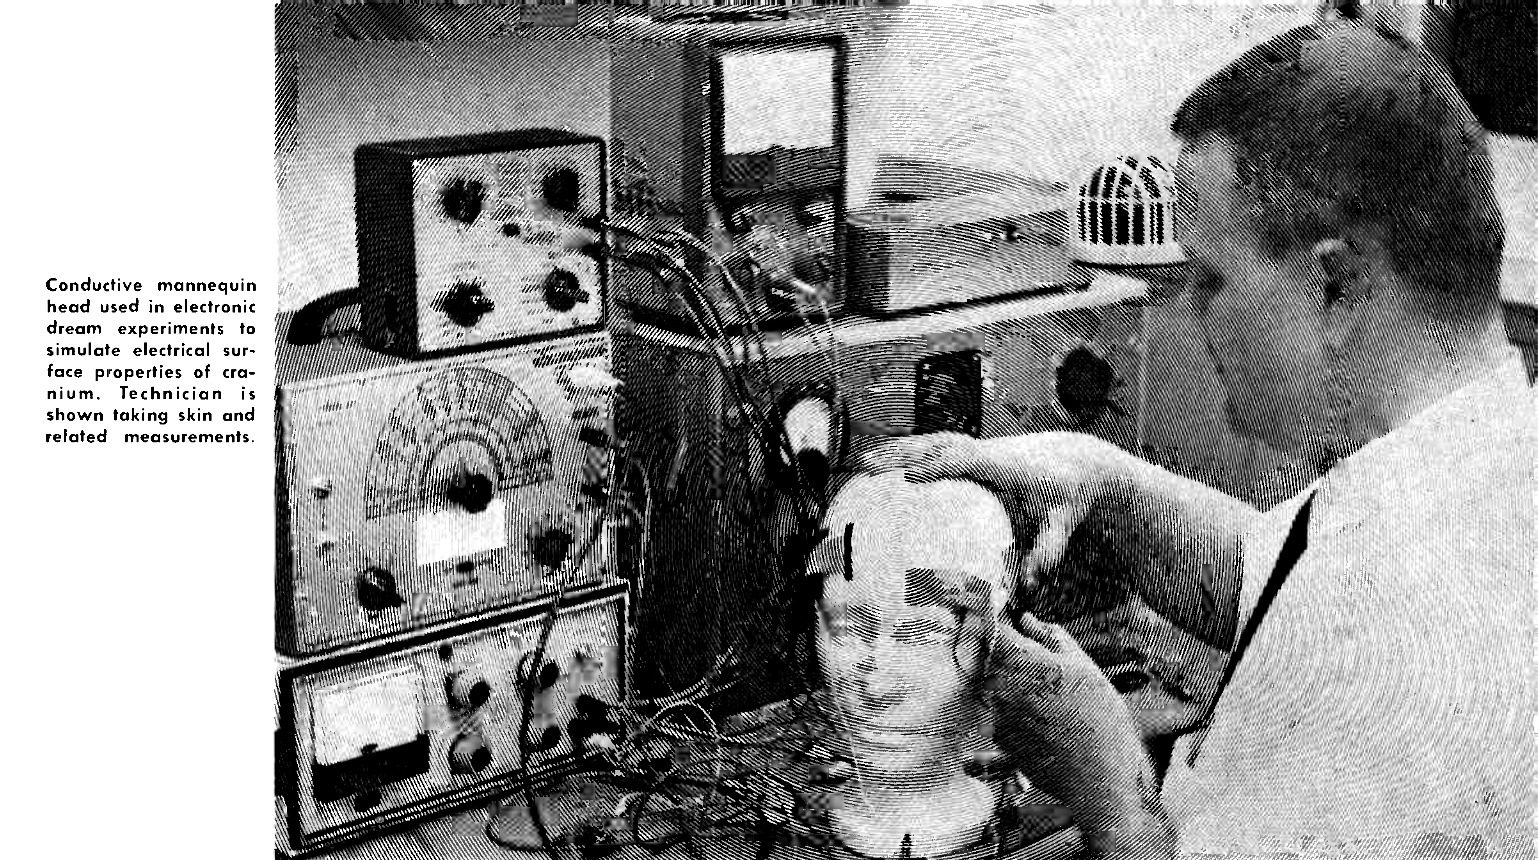 Conductive mannequin head used in electronic dream experiments to stimulate electrical surface properties of cranium. Technician is shown taking skin and related measurements.